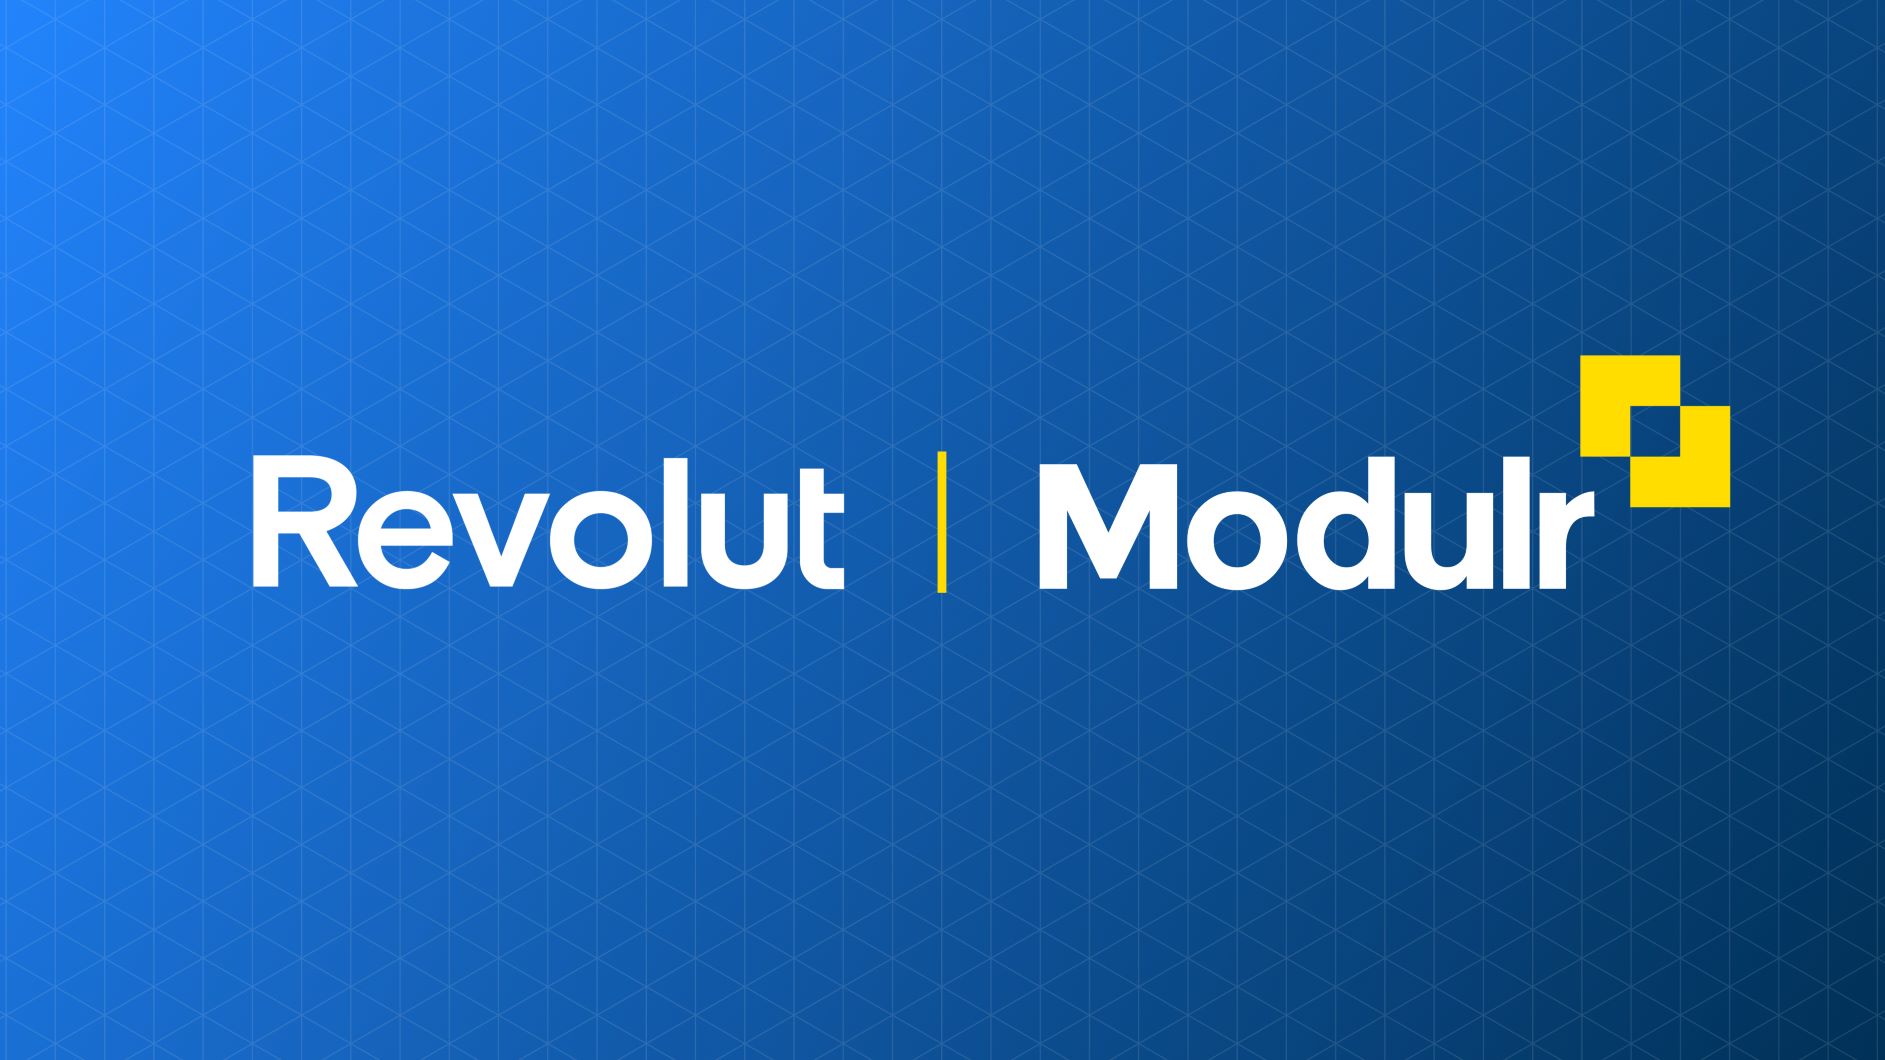 Revolut Launches Early Salary Feature in the UK, Powered by Modulr